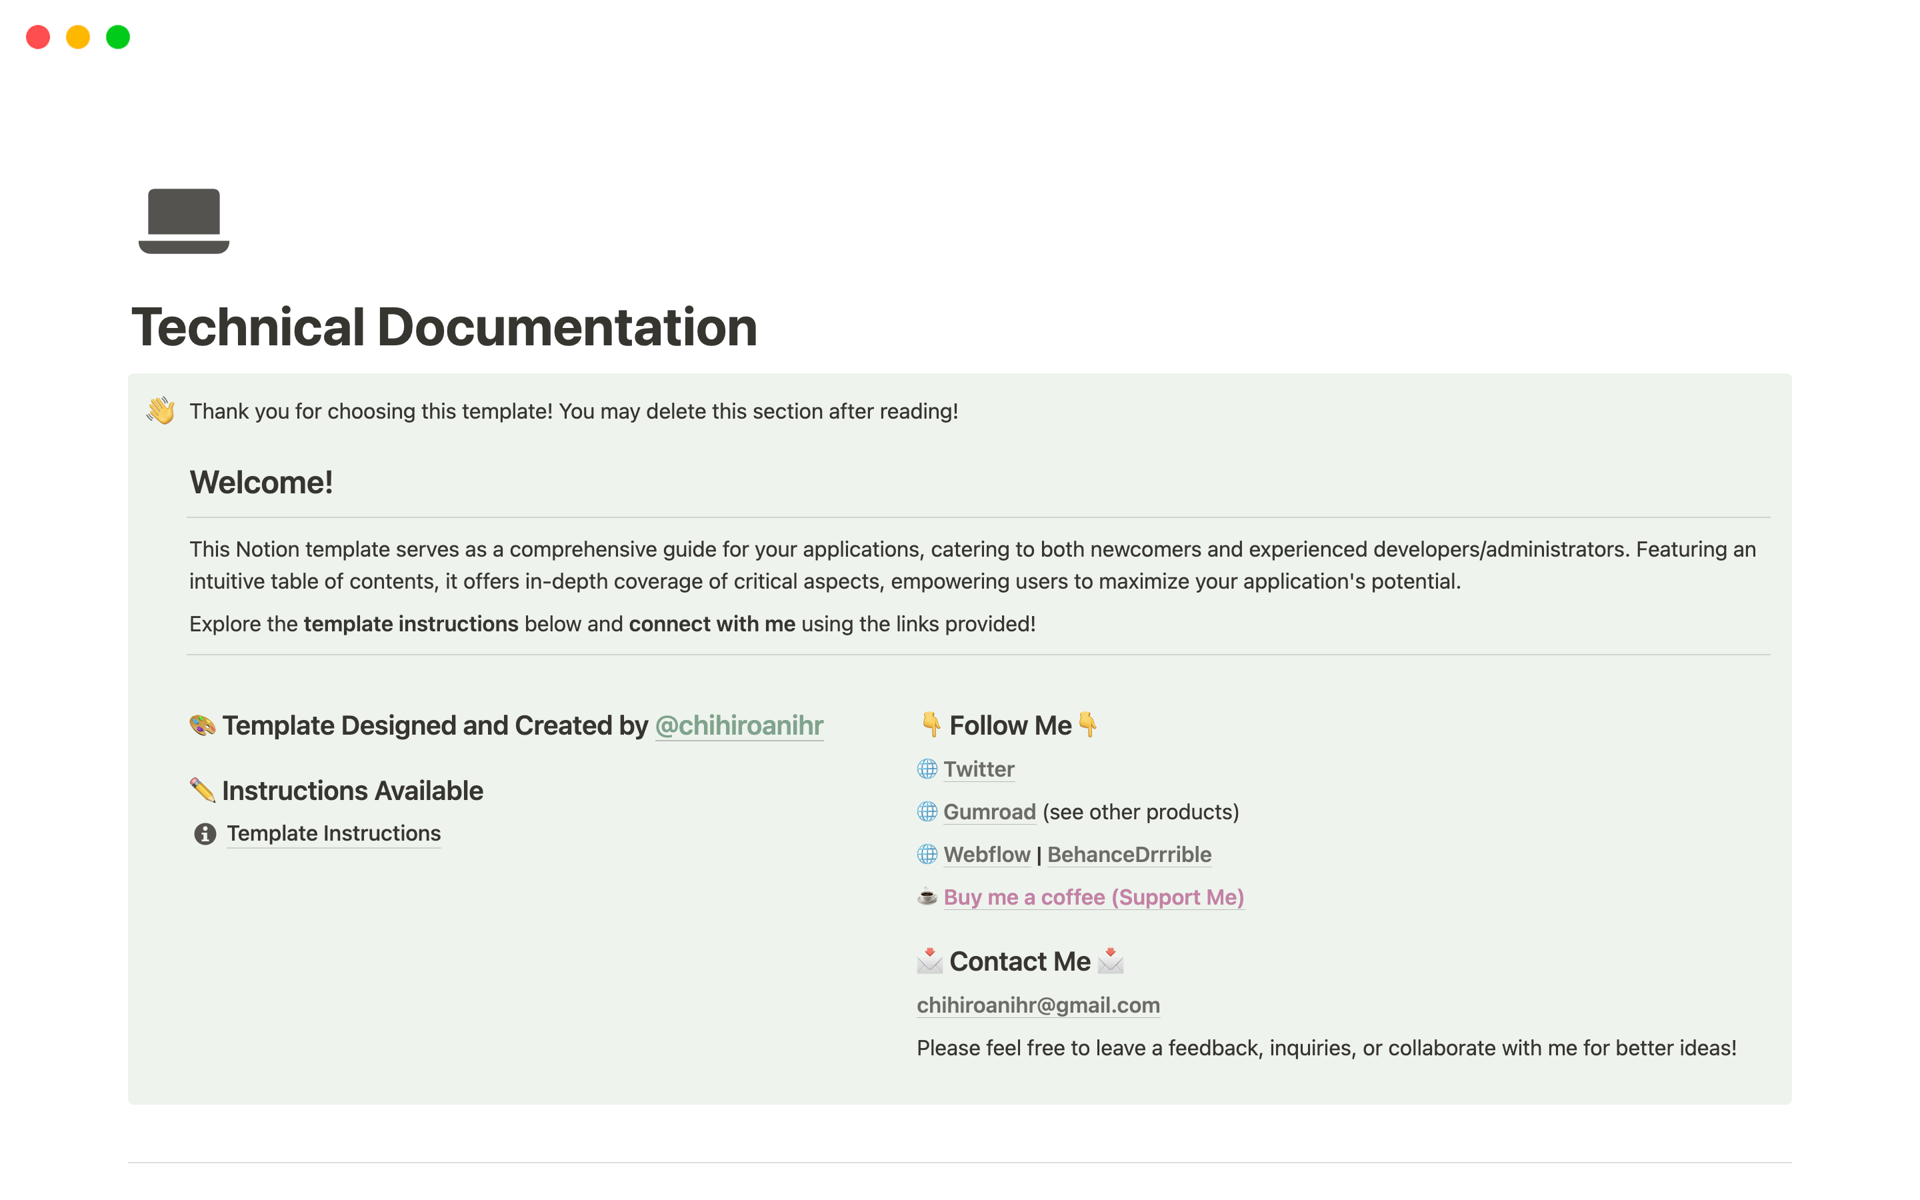 A comprehensive technical documentation template offering a user-friendly guide for both beginners and experienced administrators to maximize the potential of your application.